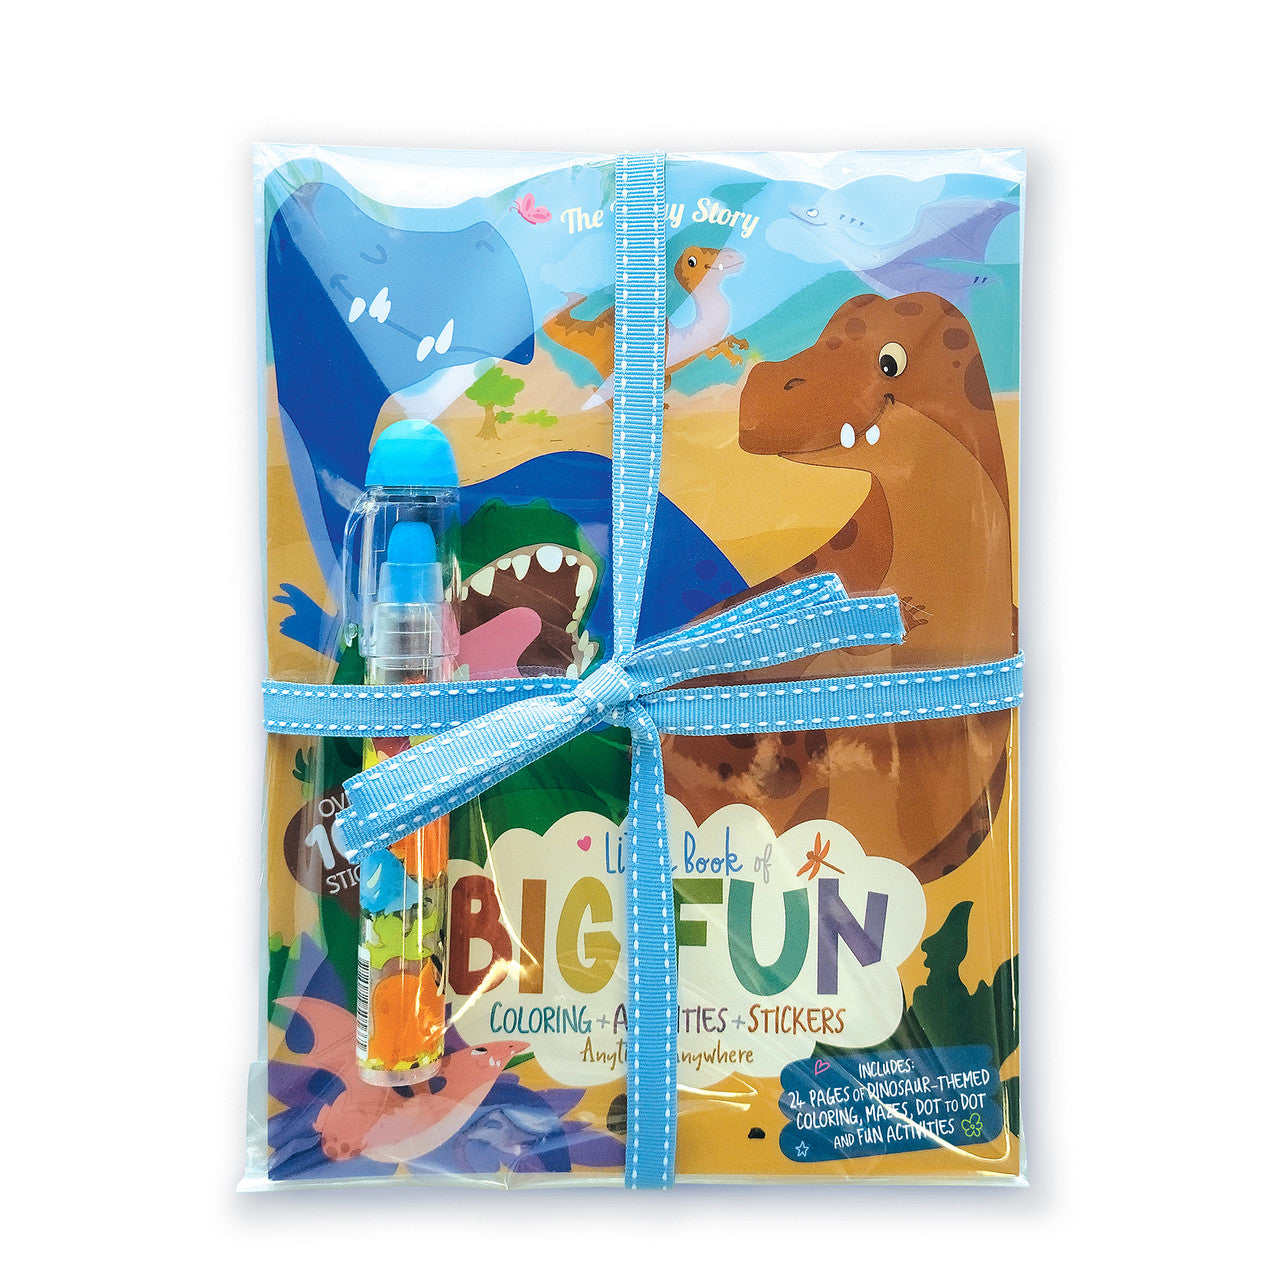 The Piggy Story Activity Book and Stackable Crayon Gift Pack